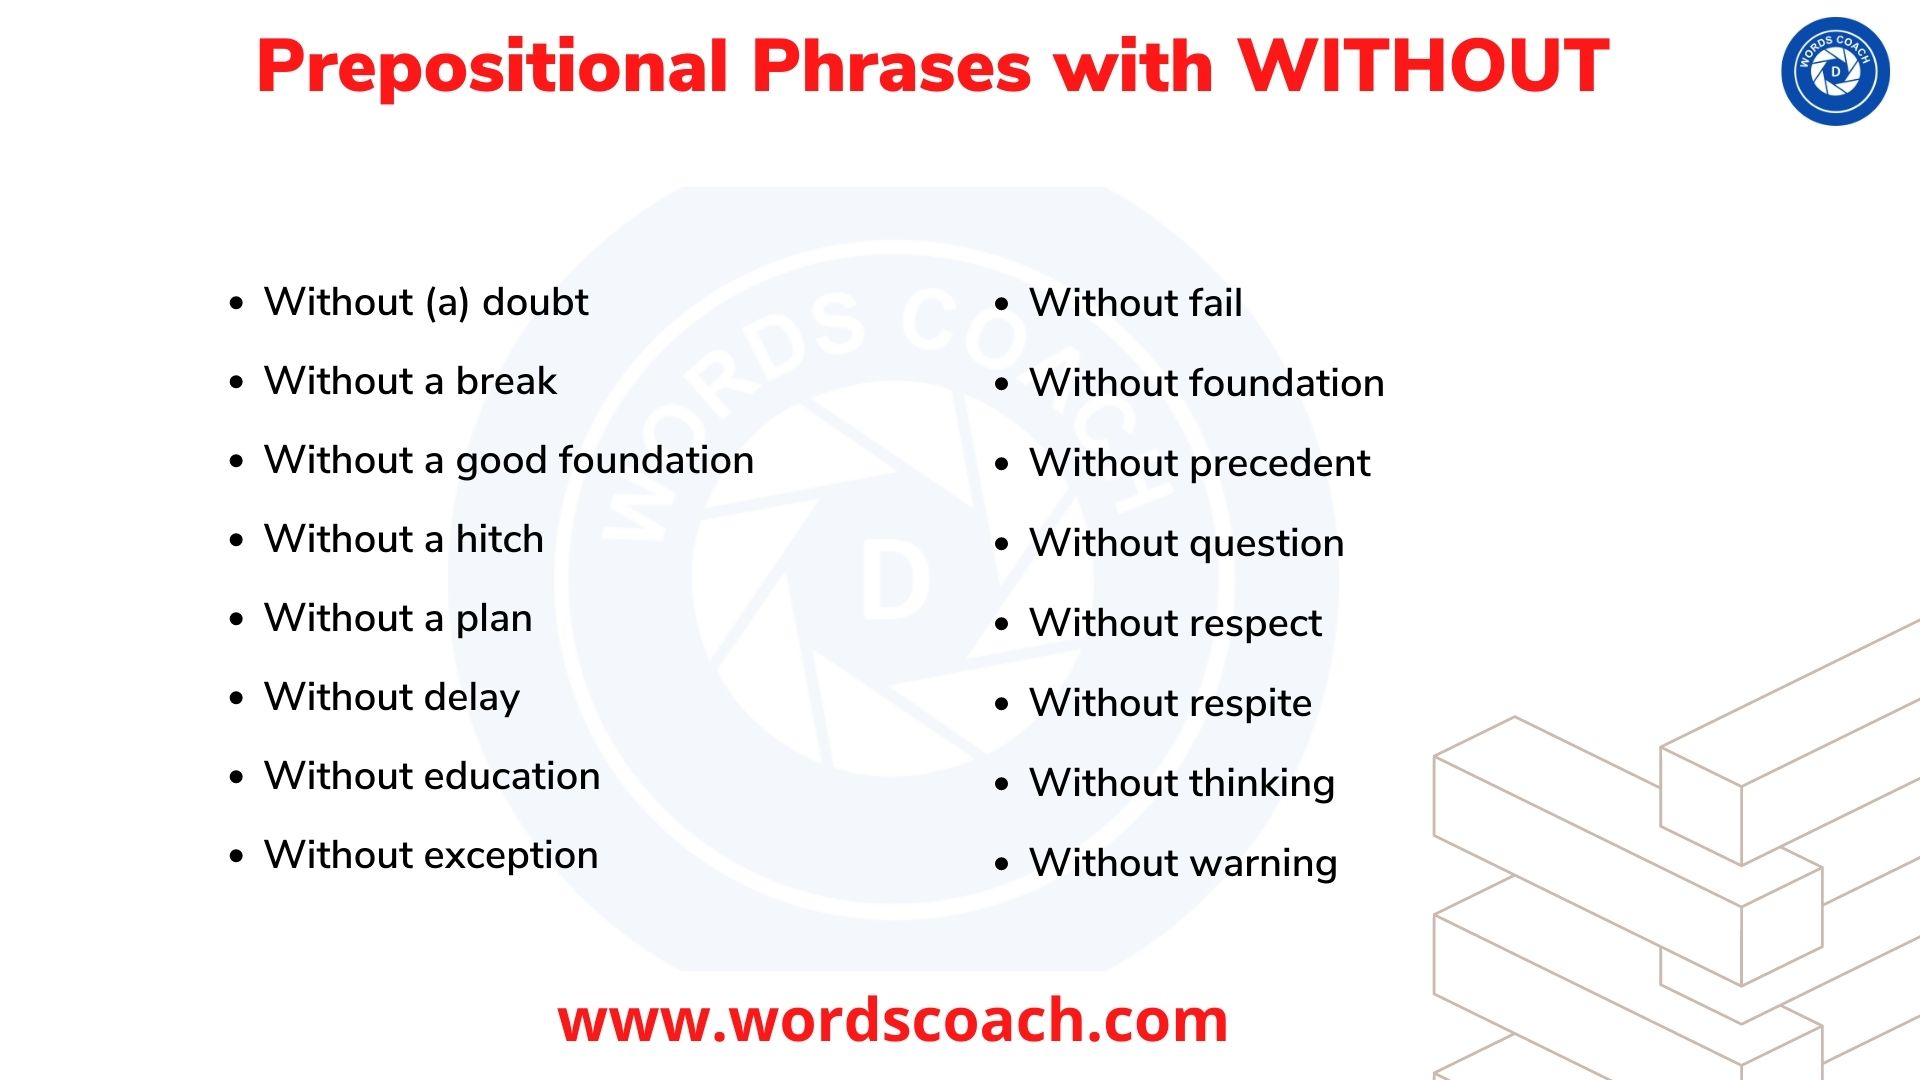 Prepositional Phrases with WITHOUT - wordscoach.com